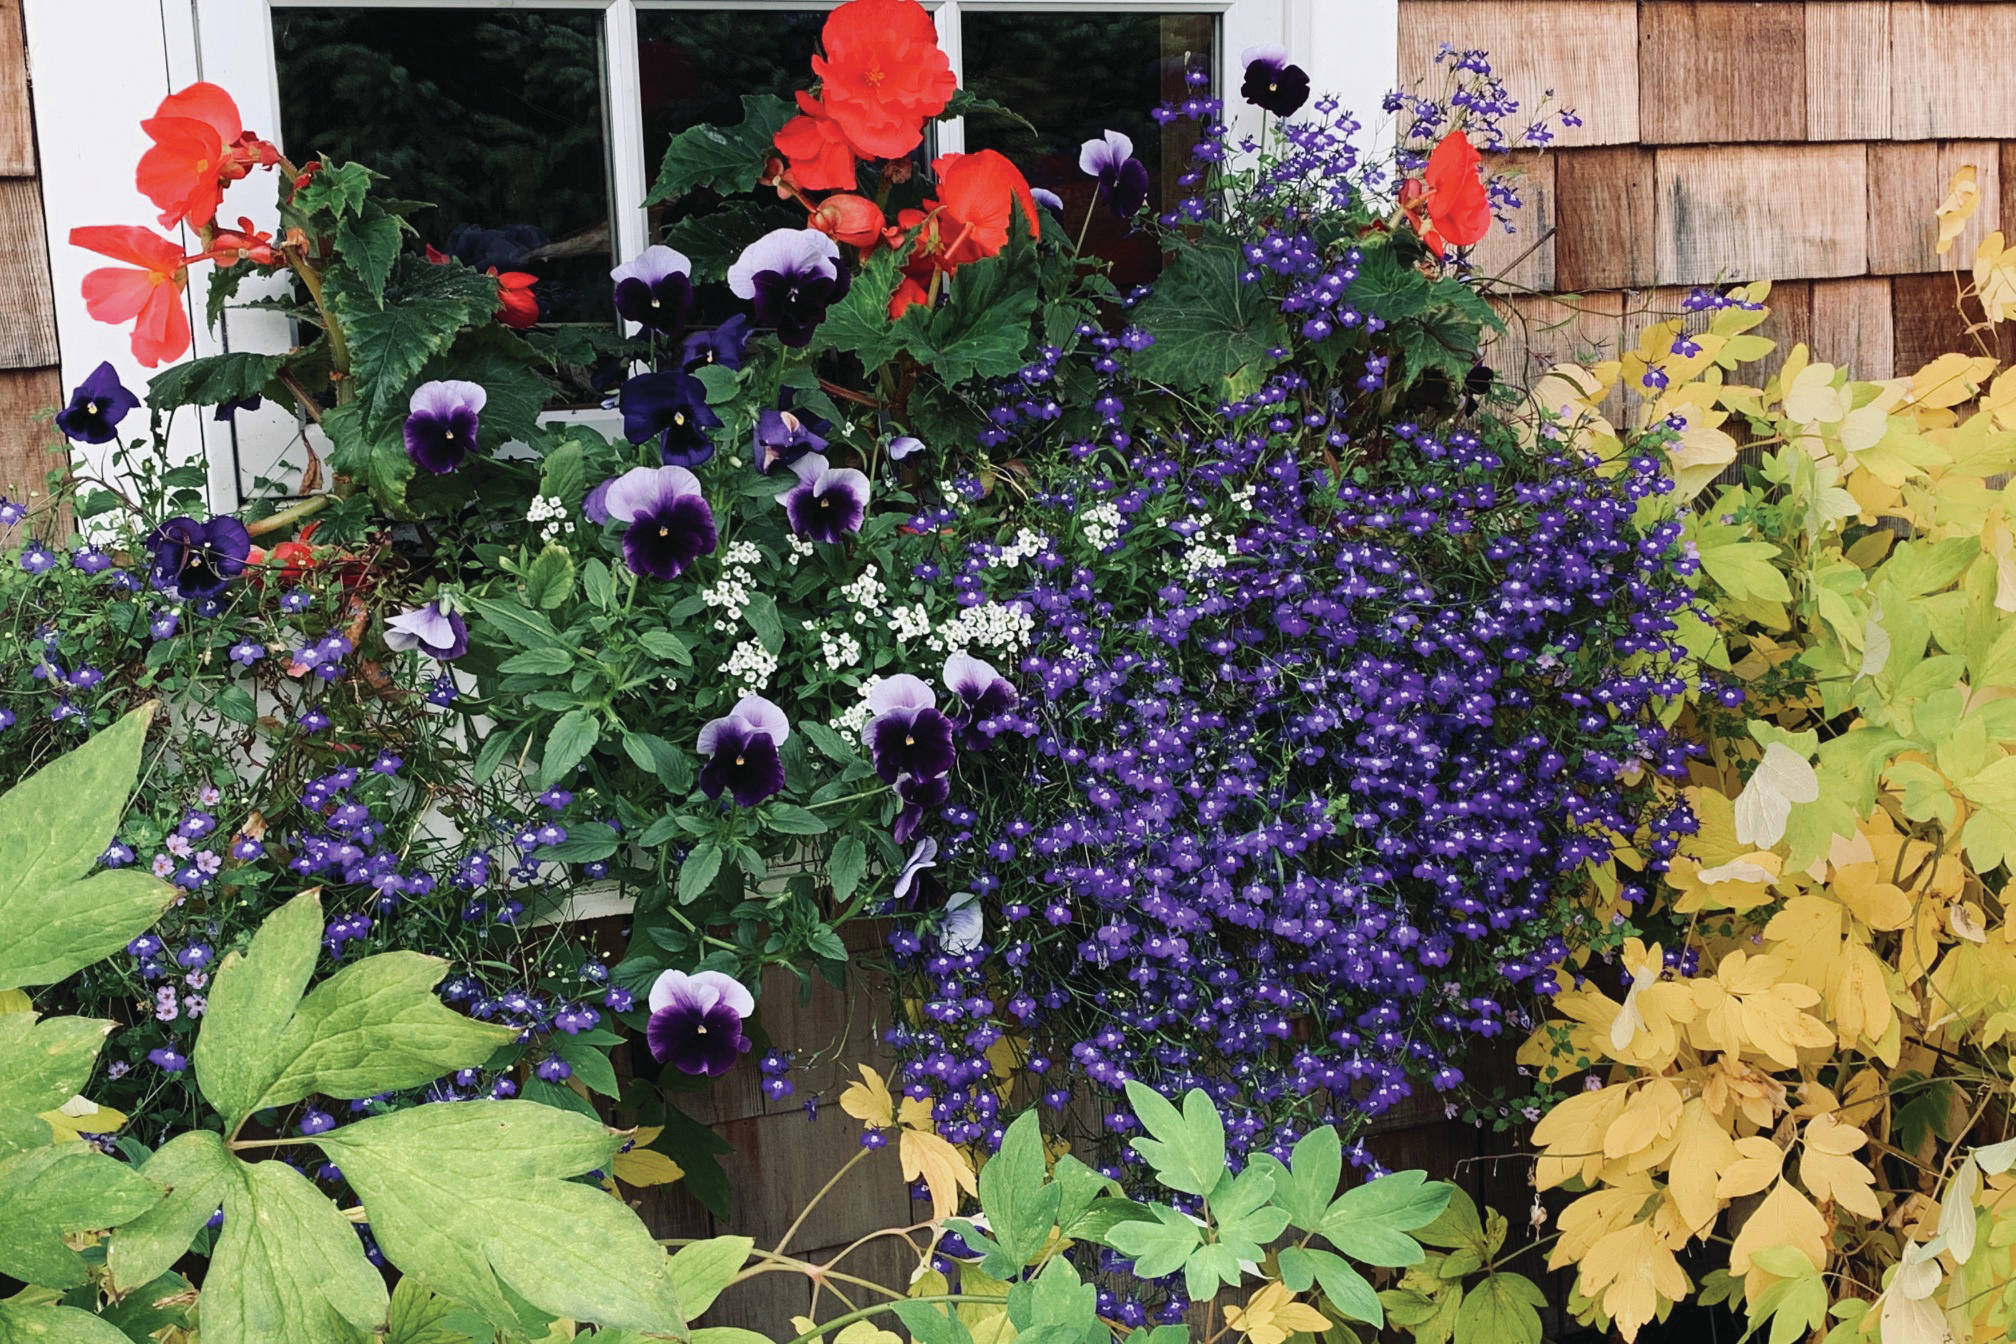 A window flower box at the Kachemak Gardener’s home shows waning begonias but enthusiastic pansies and lobelia on Sept. 6, 2019, in Homer, Alaska. (Photo by Rosemary Fitzpatrick)